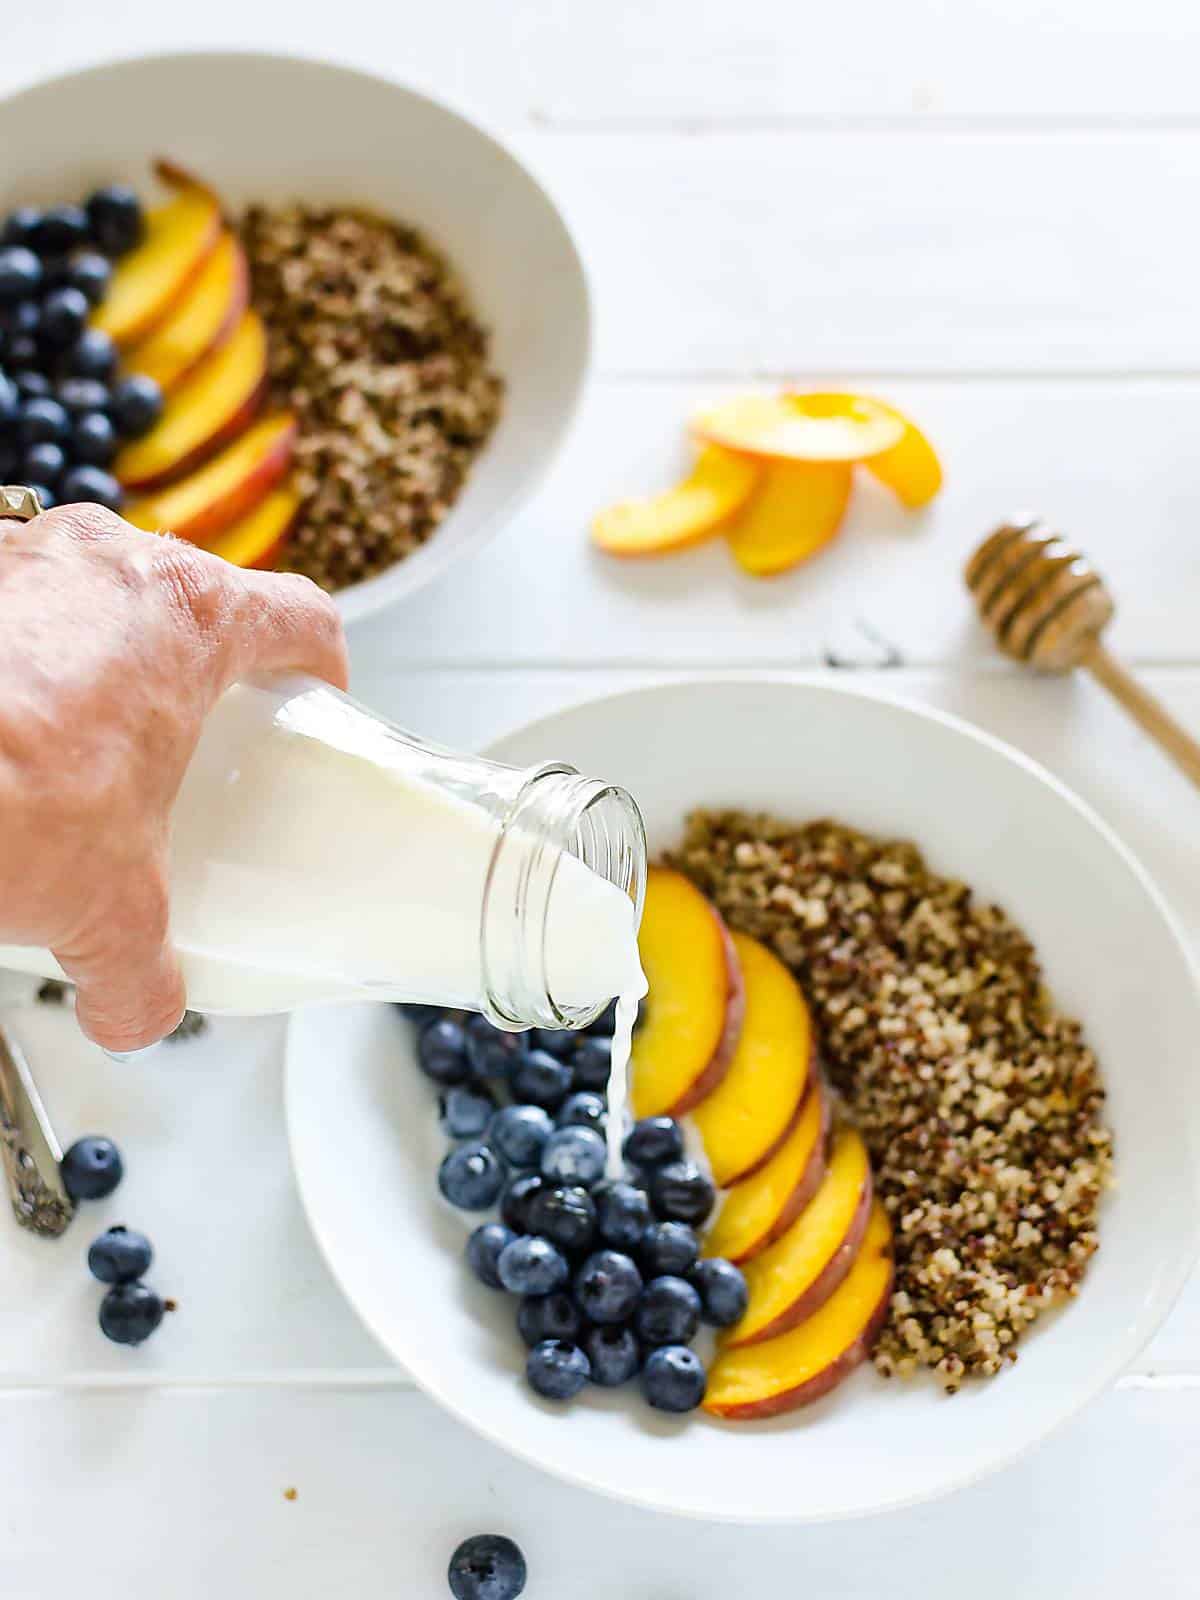 a hand pouring milk over a bowl of blueberries, peaches, and quinoa. another bowl in the back ground, a few sliced peaches on the table and a honey dipper